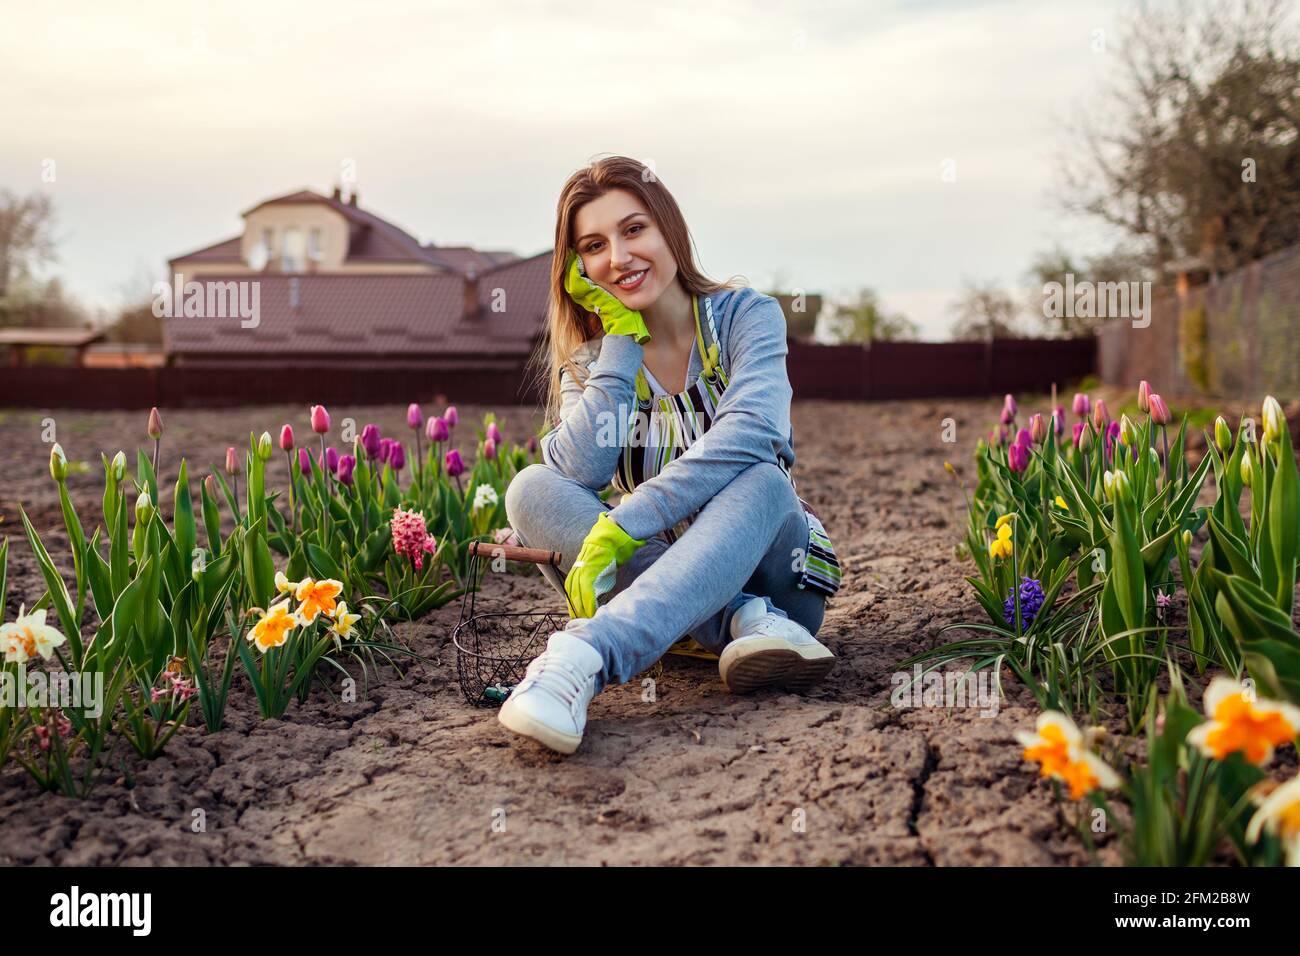 Gardener relaxing among fresh tulips, daffodils, hyacinths in spring garden. Happy woman enjoys colorful flowers Stock Photo